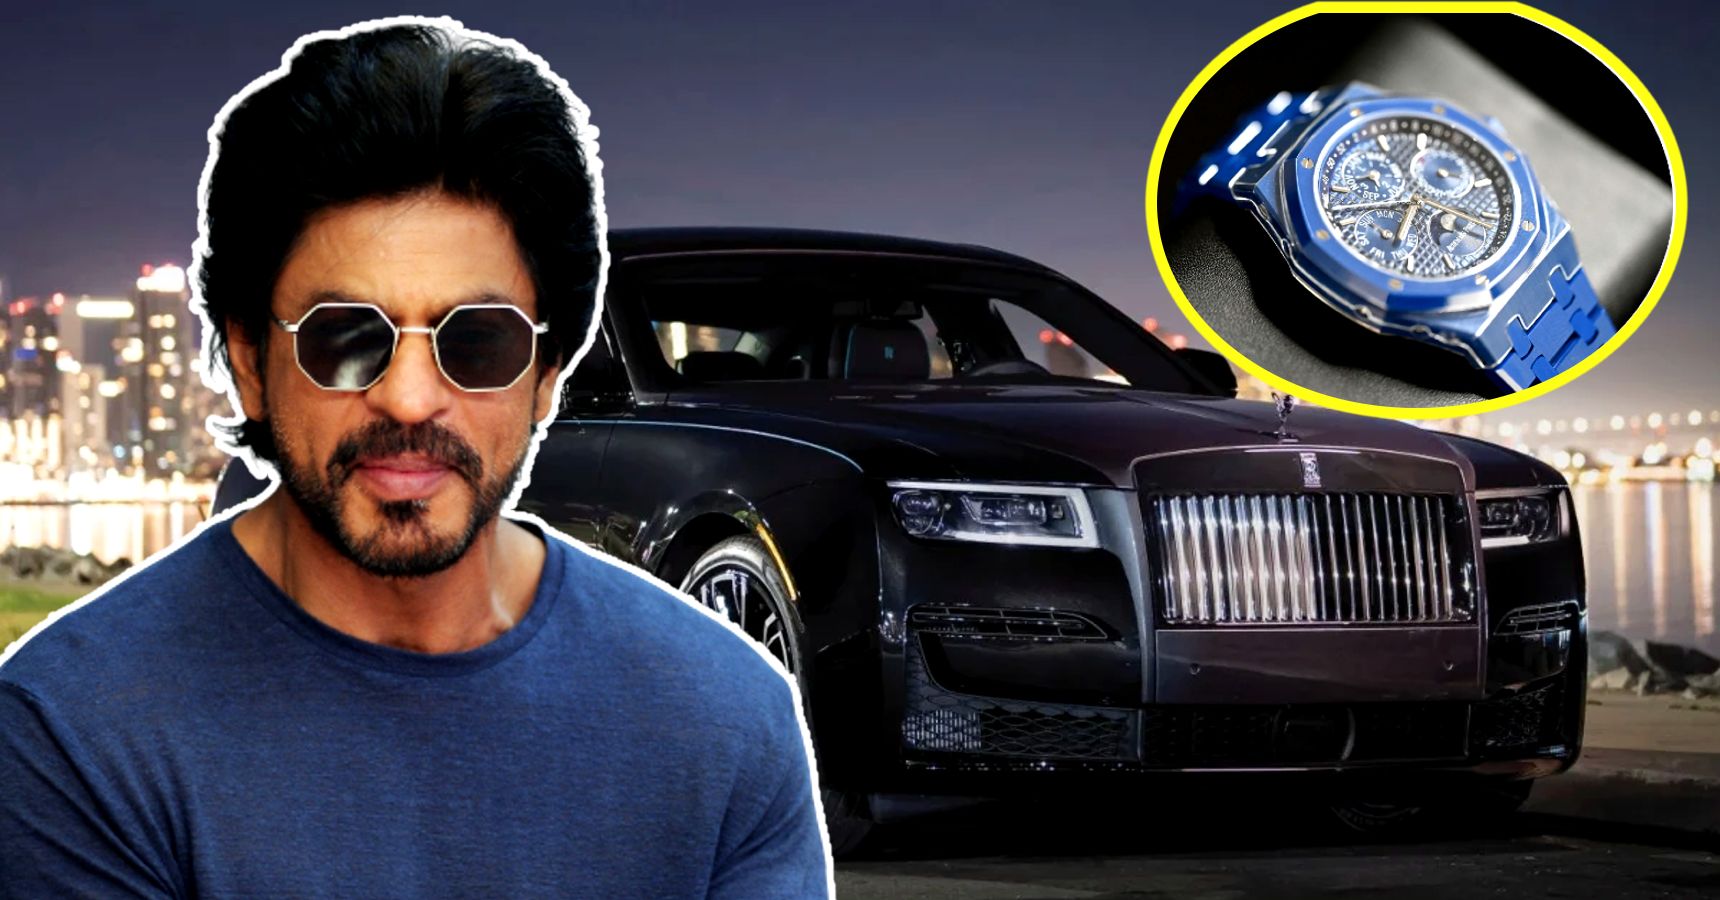 Shahrukh Khan buys 10 Cr Worth Rolls Royace Car and 4.98 Cr Watch after Pathaan's sucess